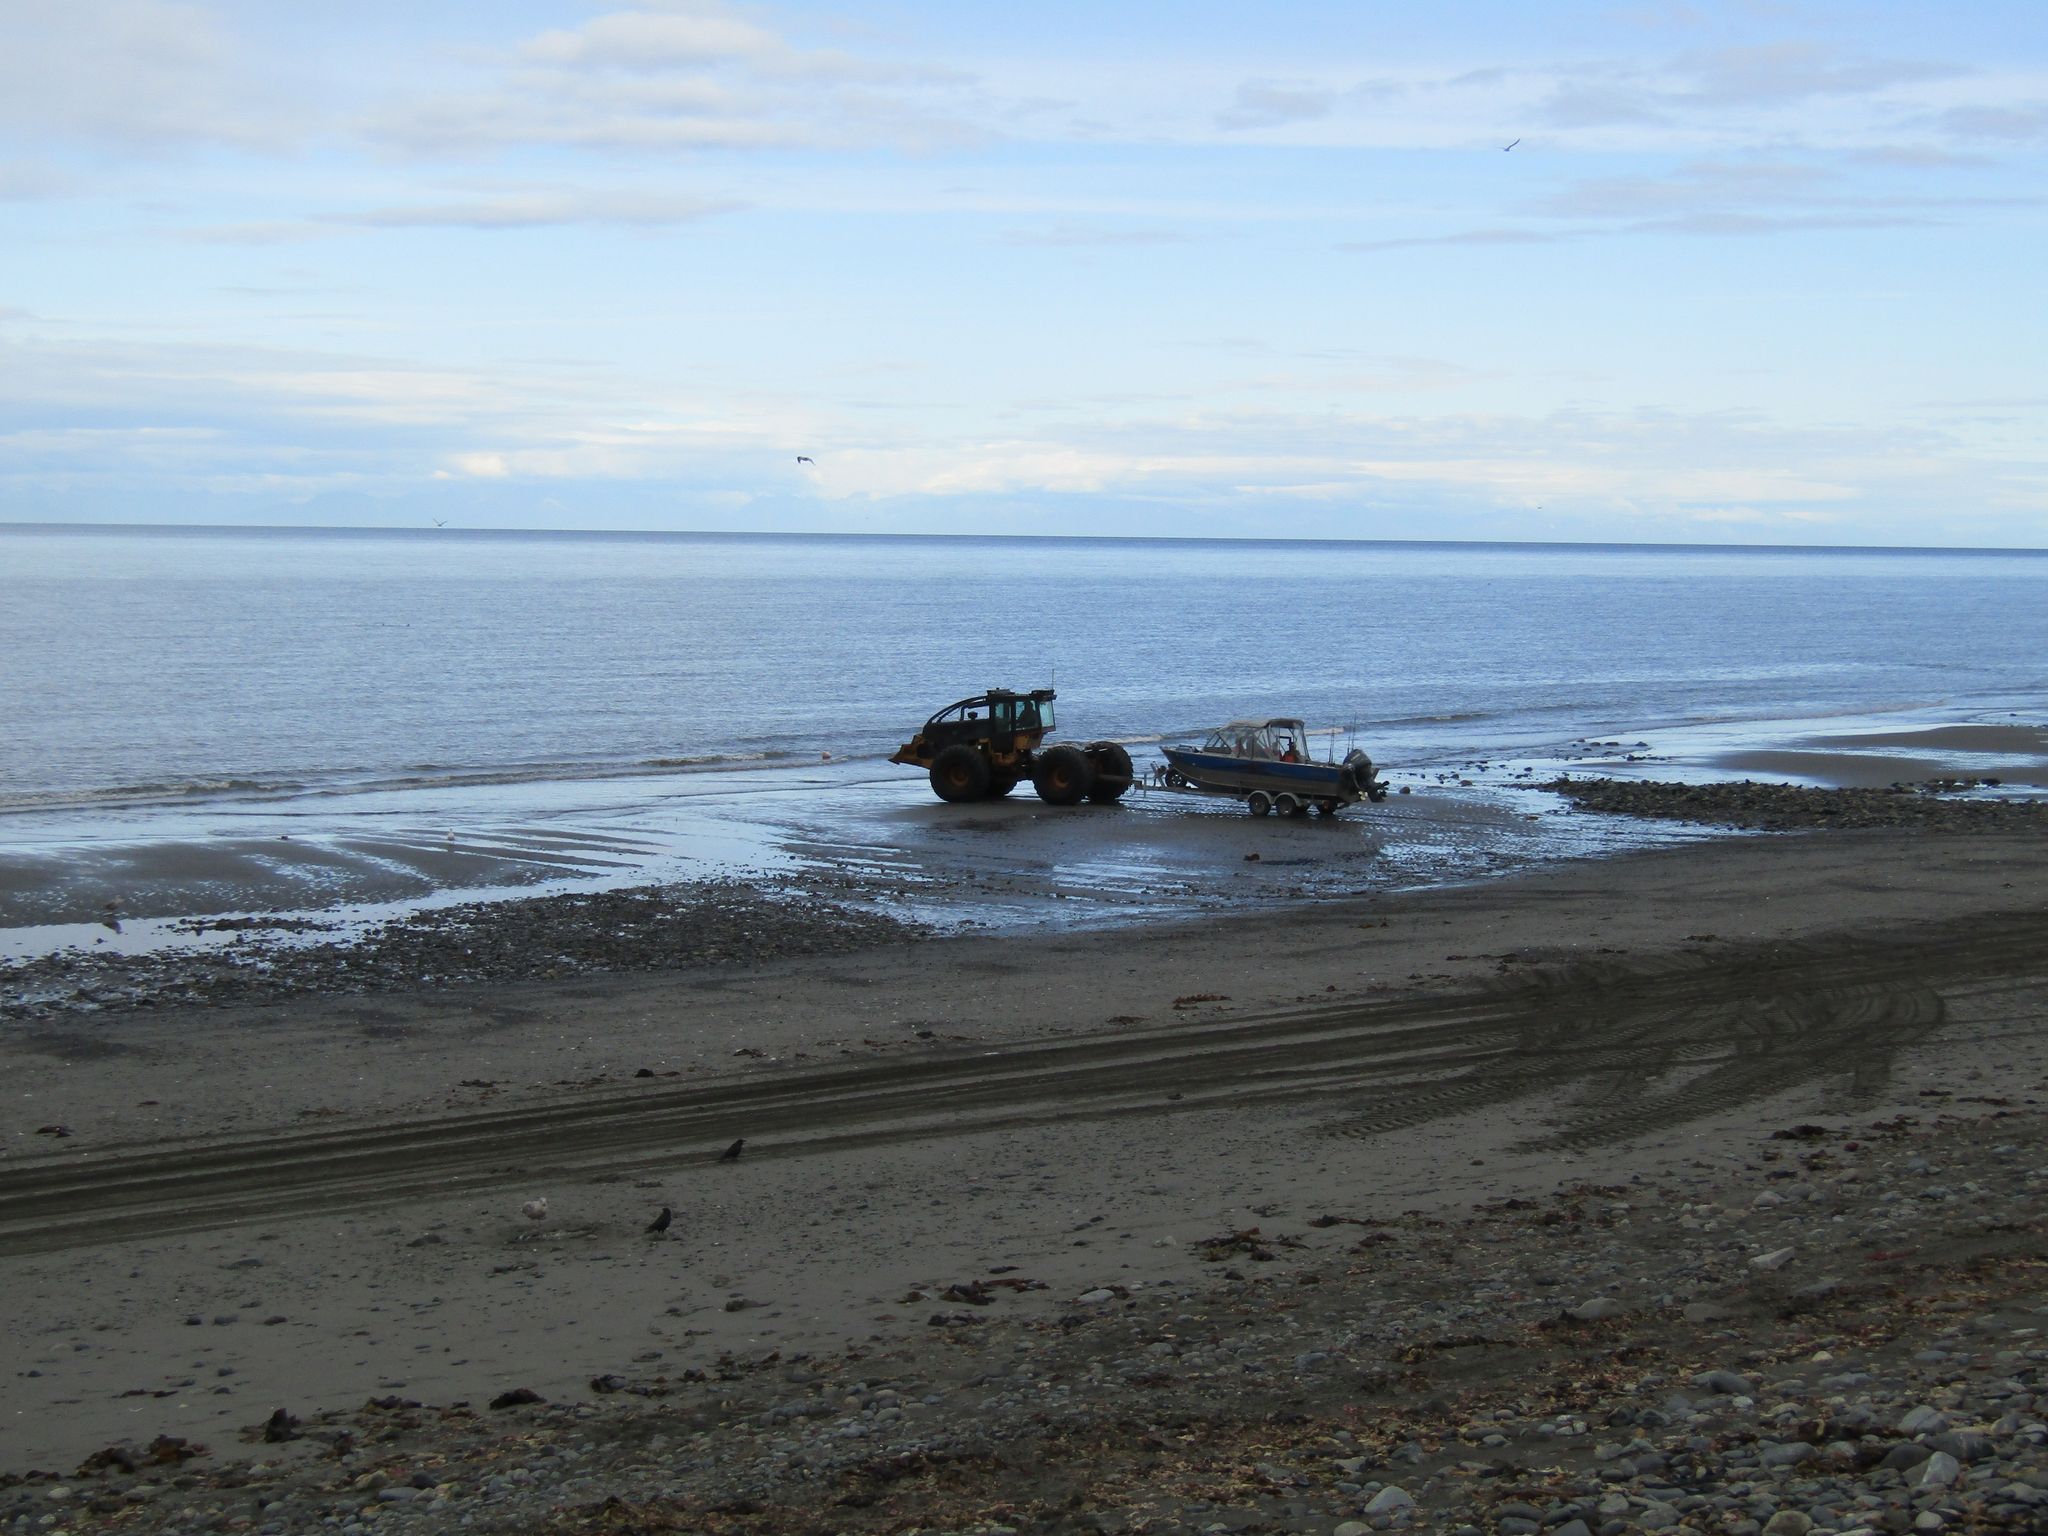 Tractor Boat Operations at Anchor Point, along Cook Inlet